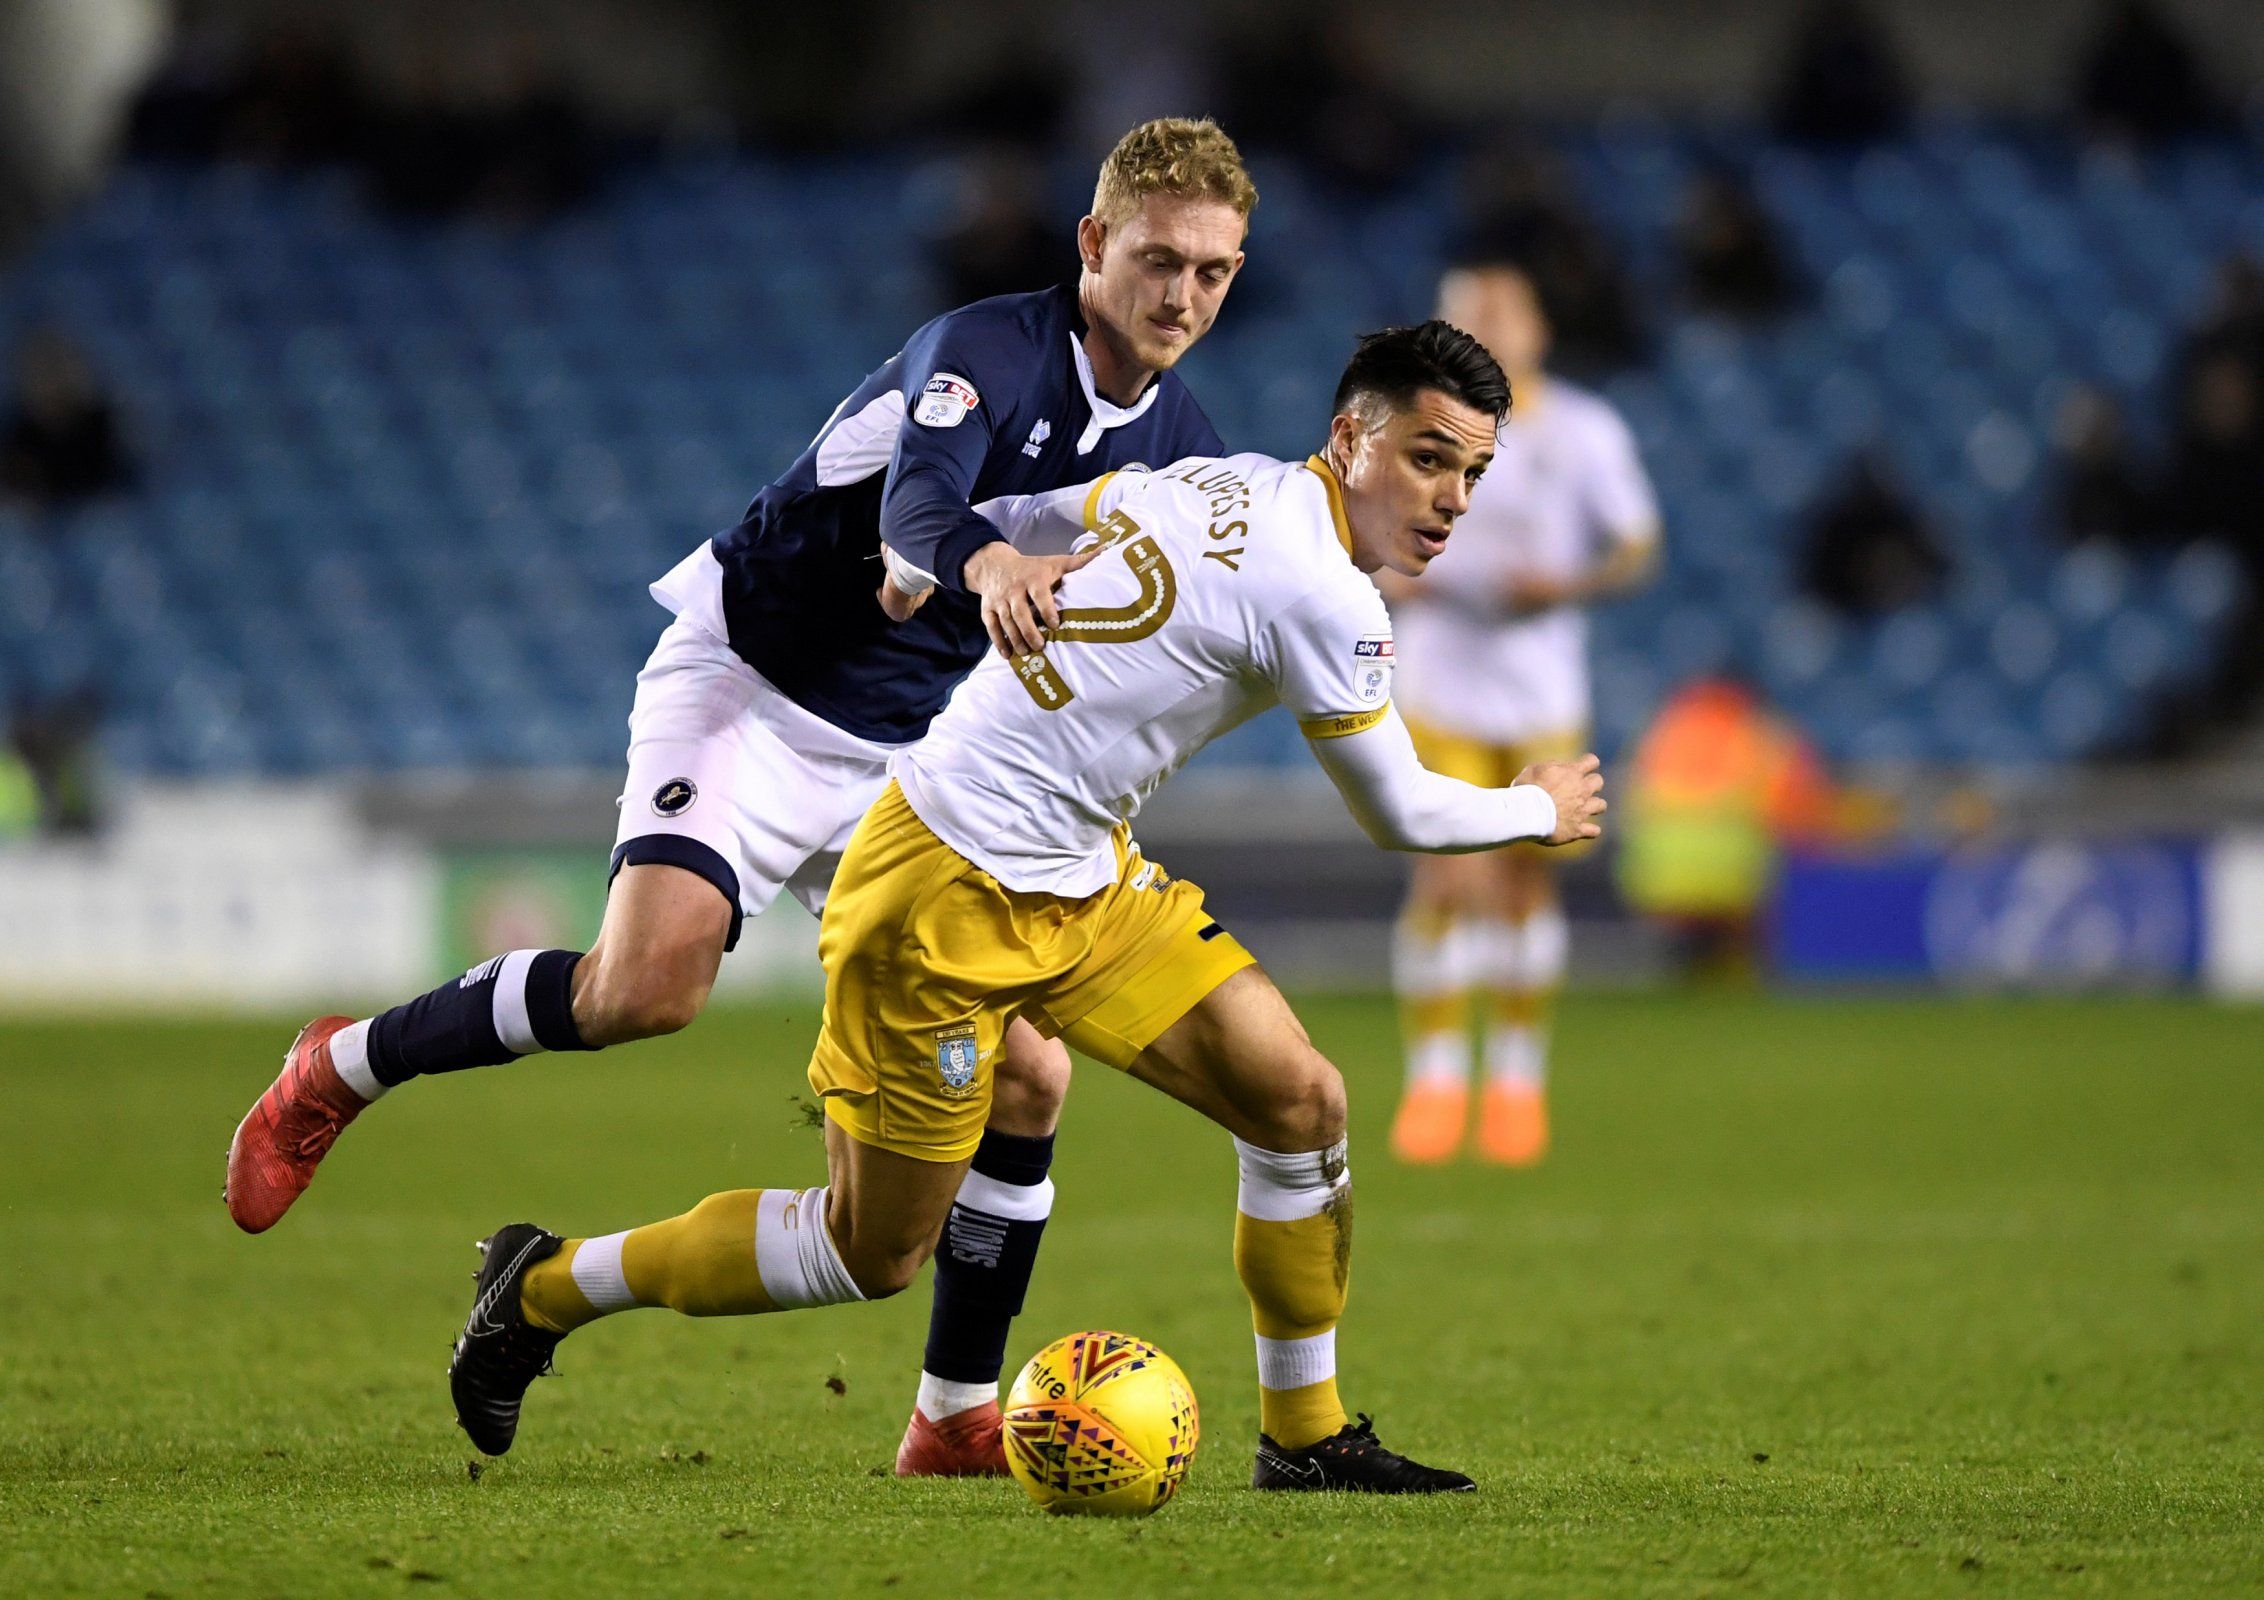 George Saville for Millwall vs Sheffield Wednesday